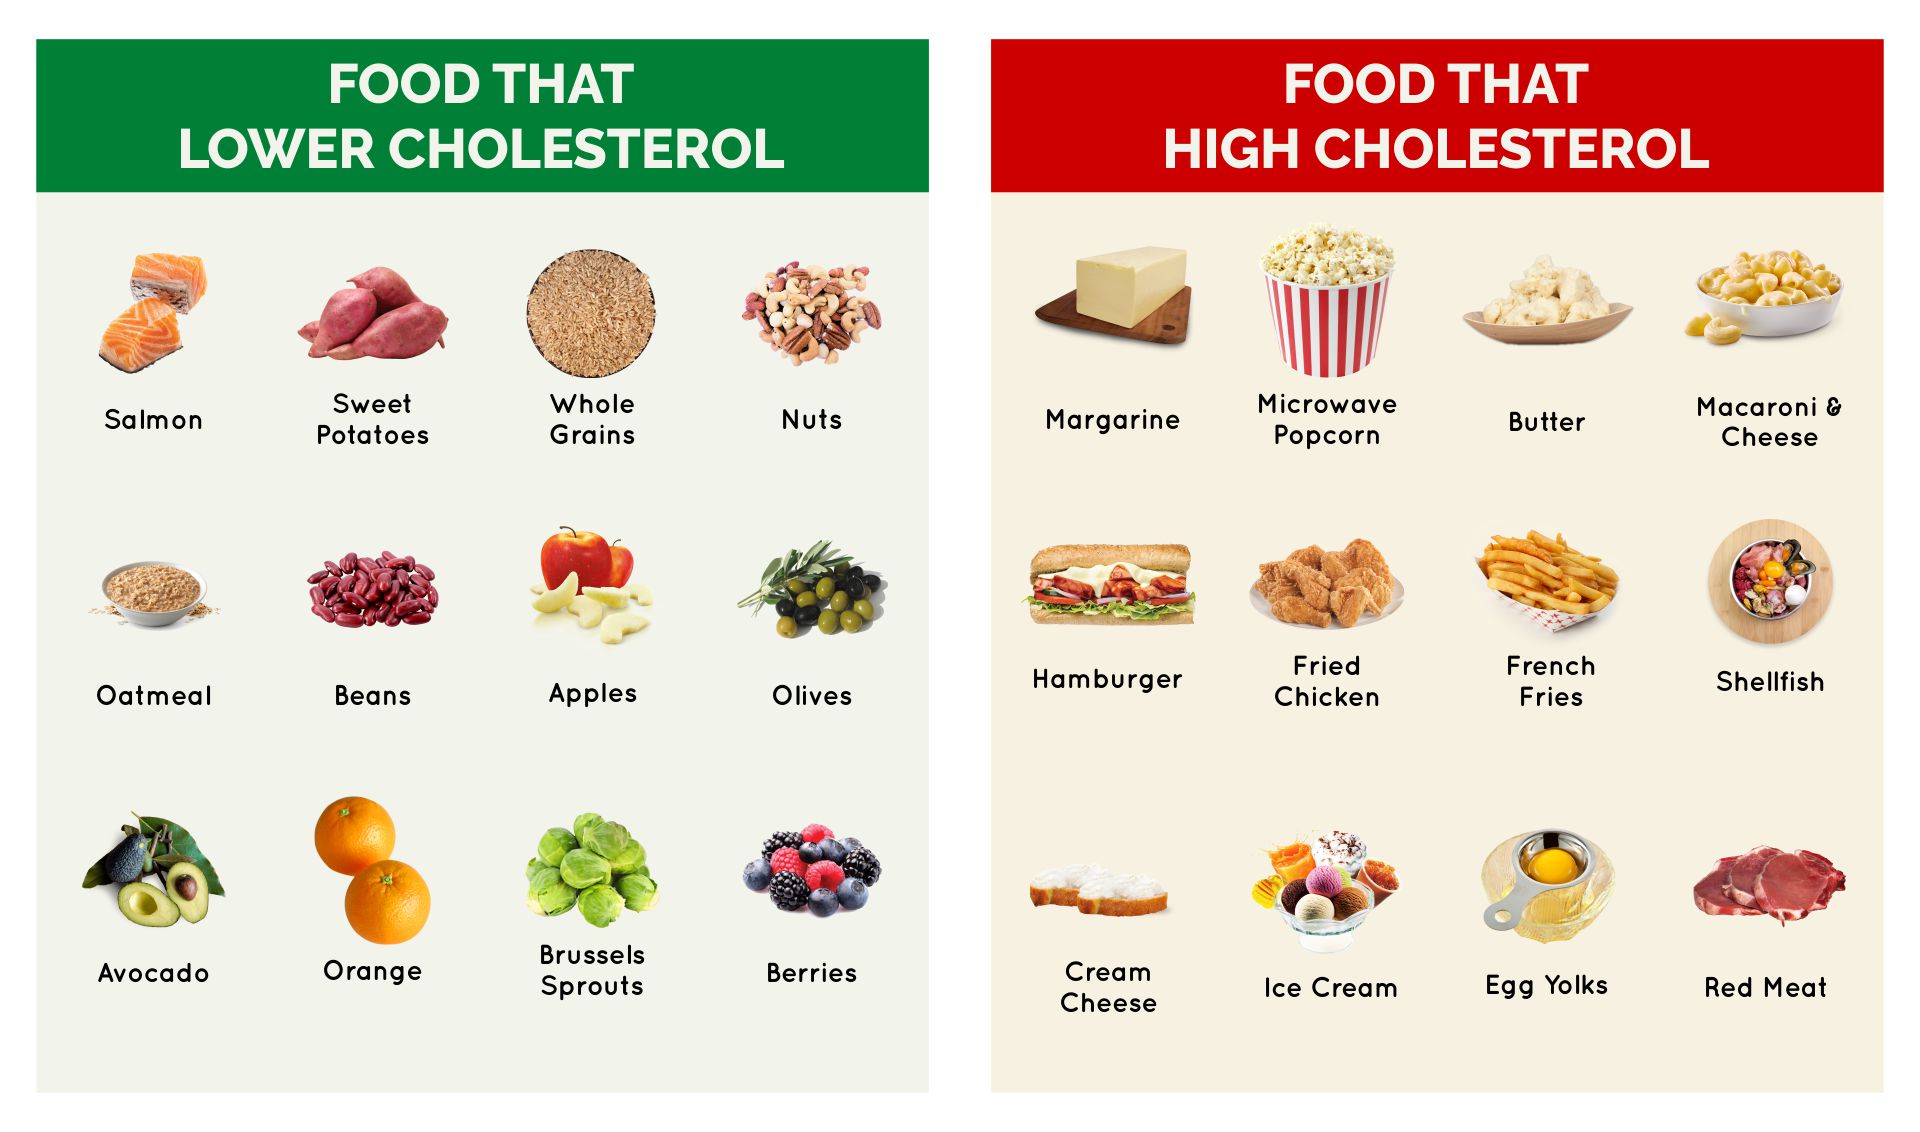 6-best-images-of-printable-cholesterol-food-chart-low-cholesterol